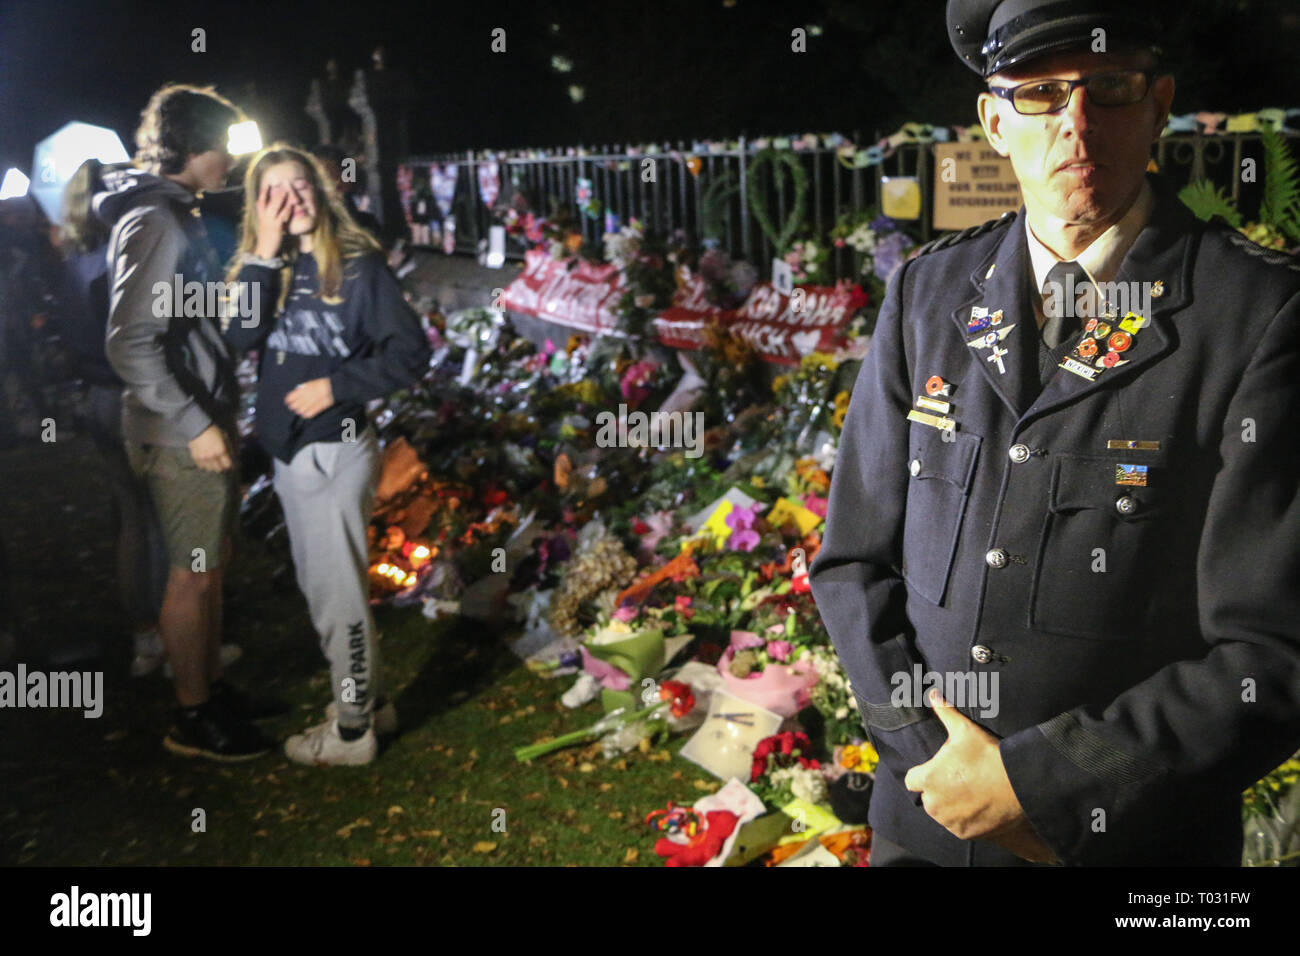 Christchurch, Canterbury, New Zealand. 17th Mar, 2019. A Police officer seen at the tribute of the Christchurch mosques shooting. Around 50 people has been reportedly killed in the Christchurch mosques terrorist attack shooting targeting the Masjid Al Noor Mosque and the Linwood Mosque. Credit: Adam Bradley/SOPA Images/ZUMA Wire/Alamy Live News Stock Photo